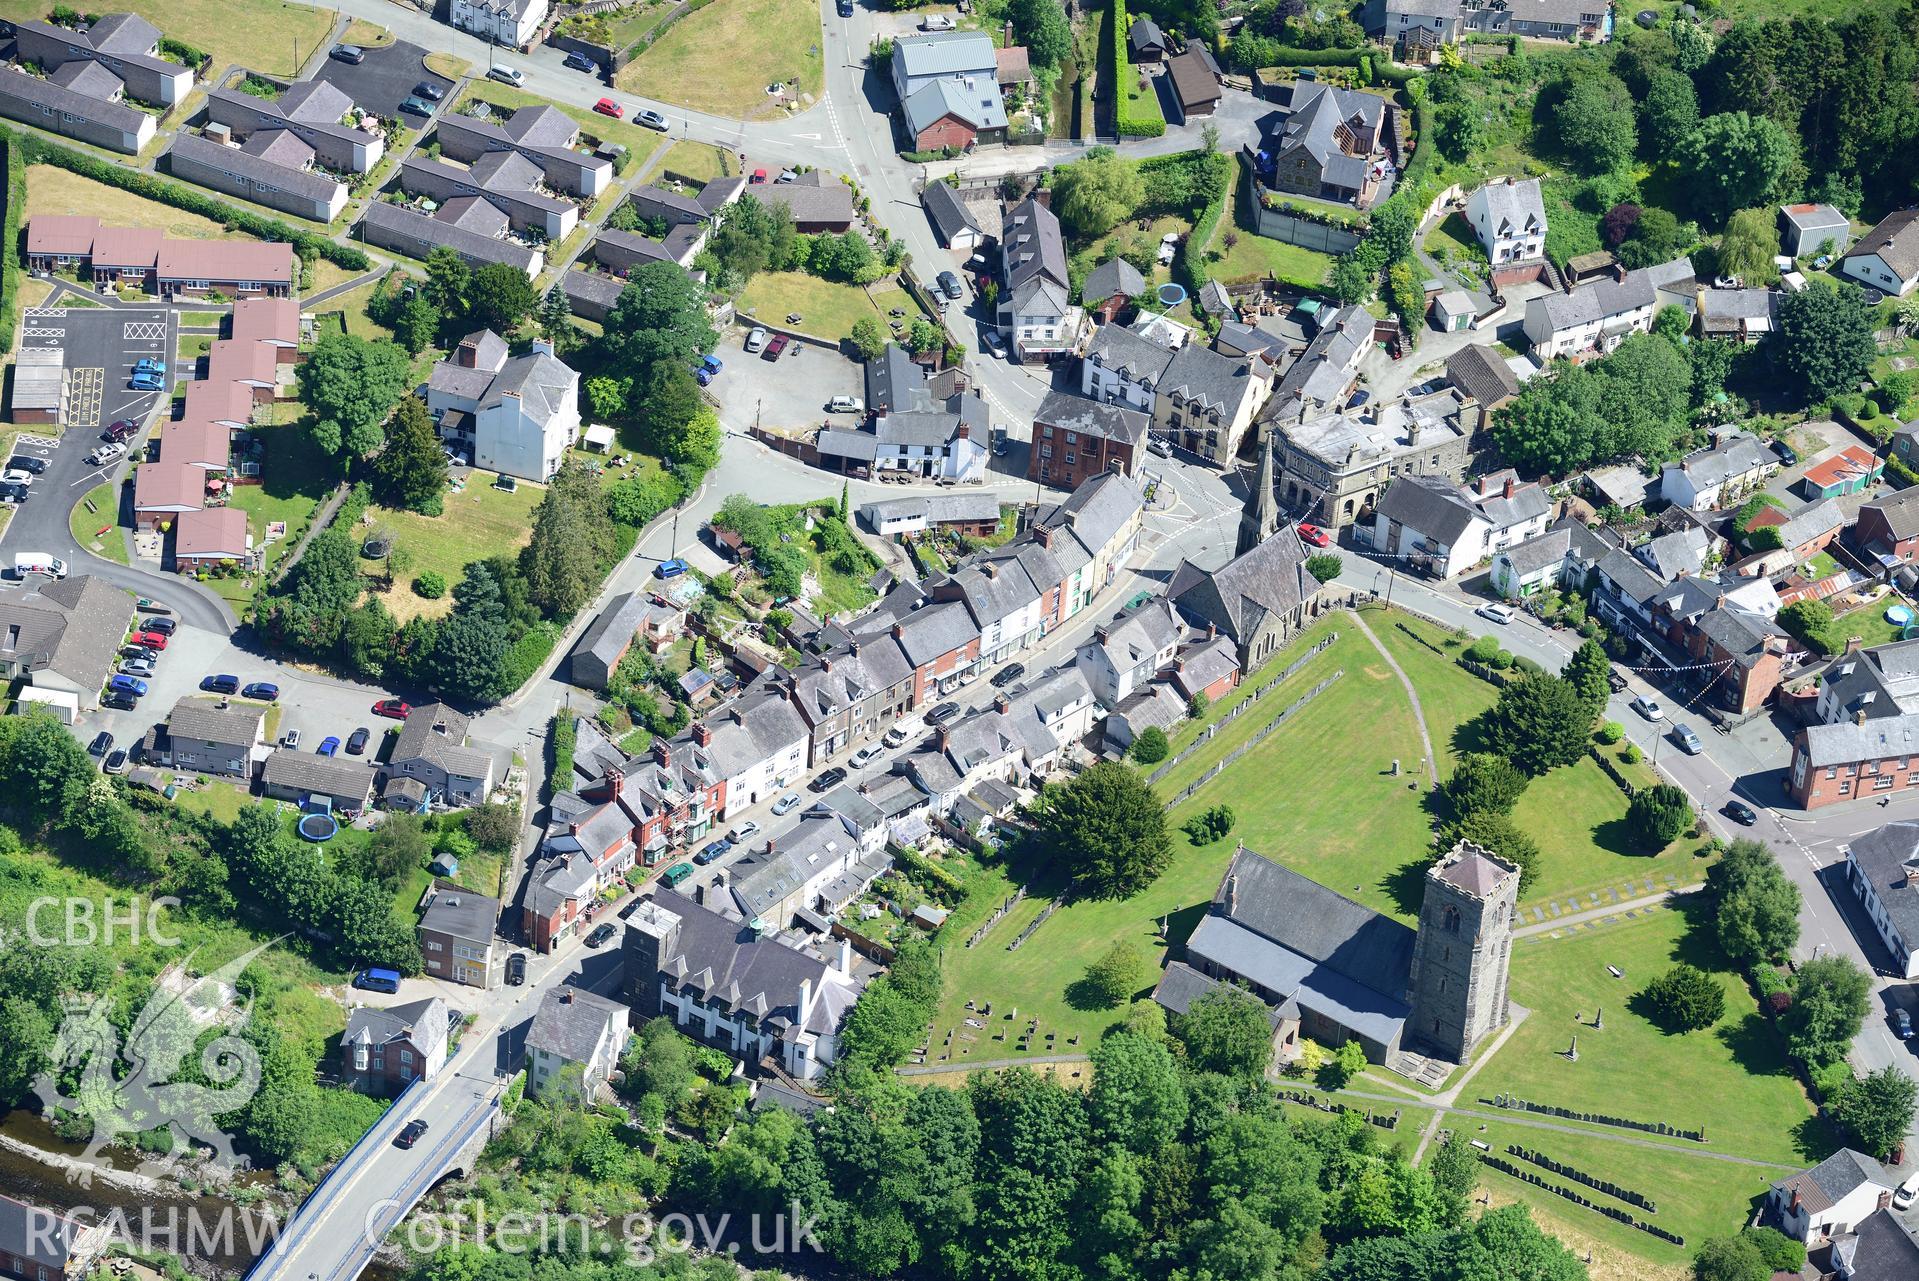 St. Mary's church in the town of Llanfair Caereinion, west of Welshpool. Oblique aerial photograph taken during the Royal Commission's programme of archaeological aerial reconnaissance by Toby Driver on 30th June 2015.